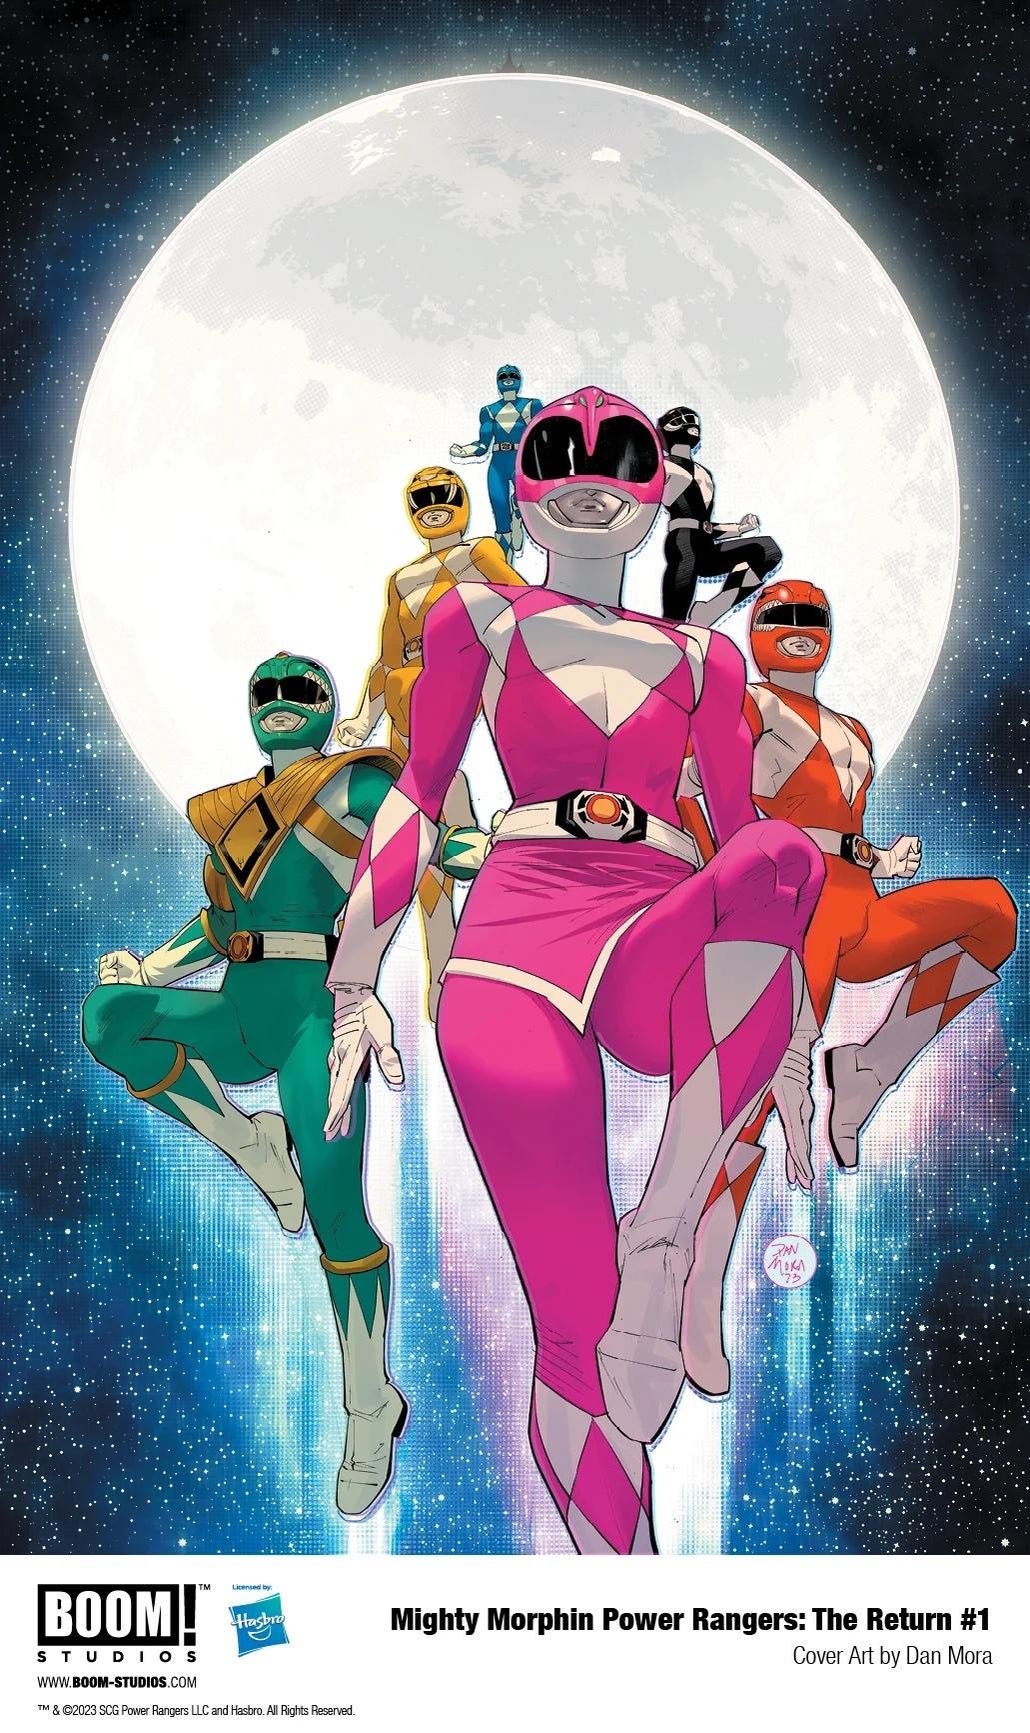 mmpr-thereturn-001-cover-b-variant-promo-1-1.jpg